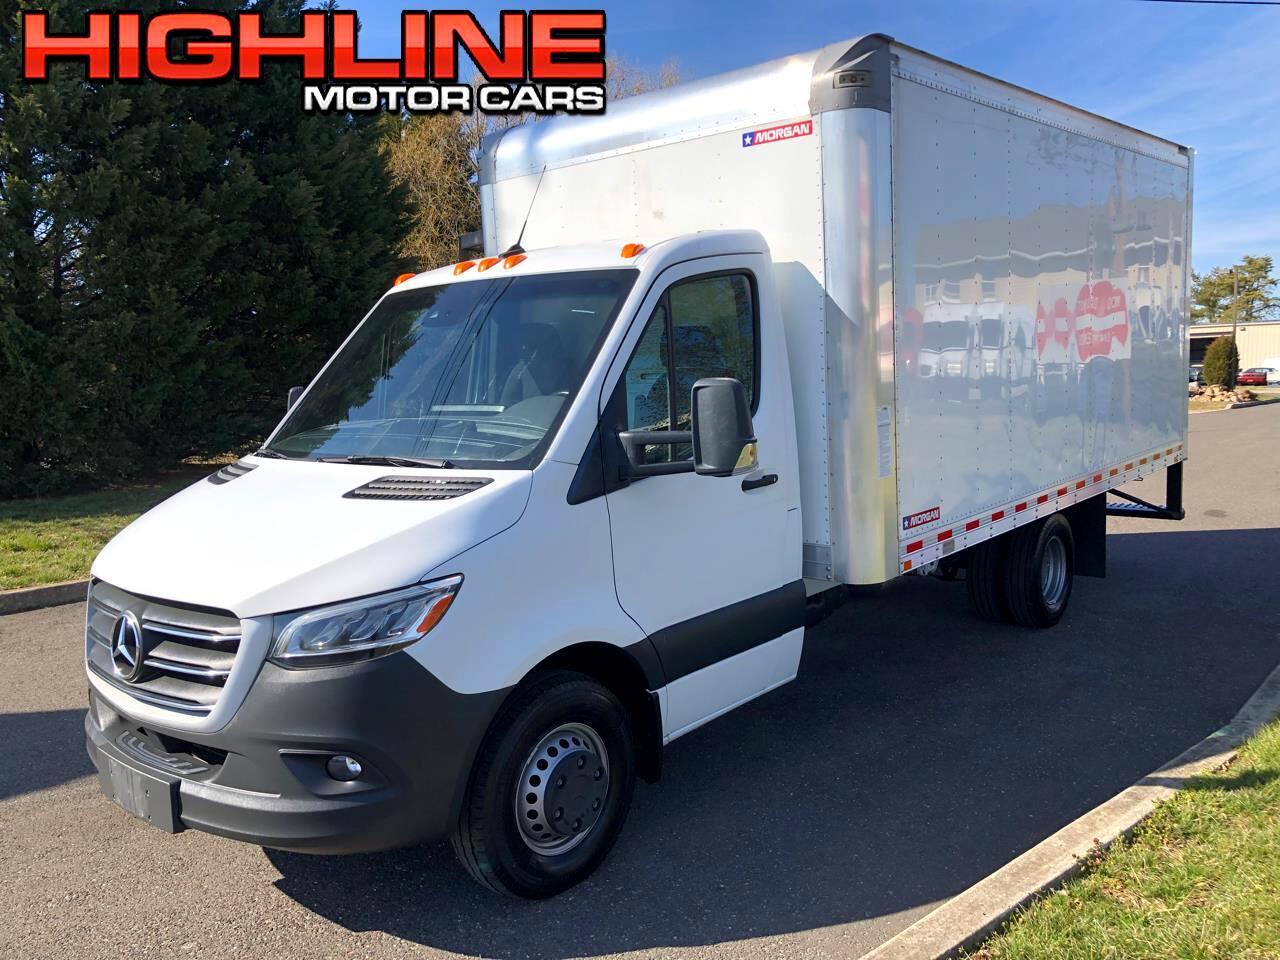 Used Mercedes-Benz Sprinter 3500/4500's in Wantage, New Jersey for sale -  MotorCloud